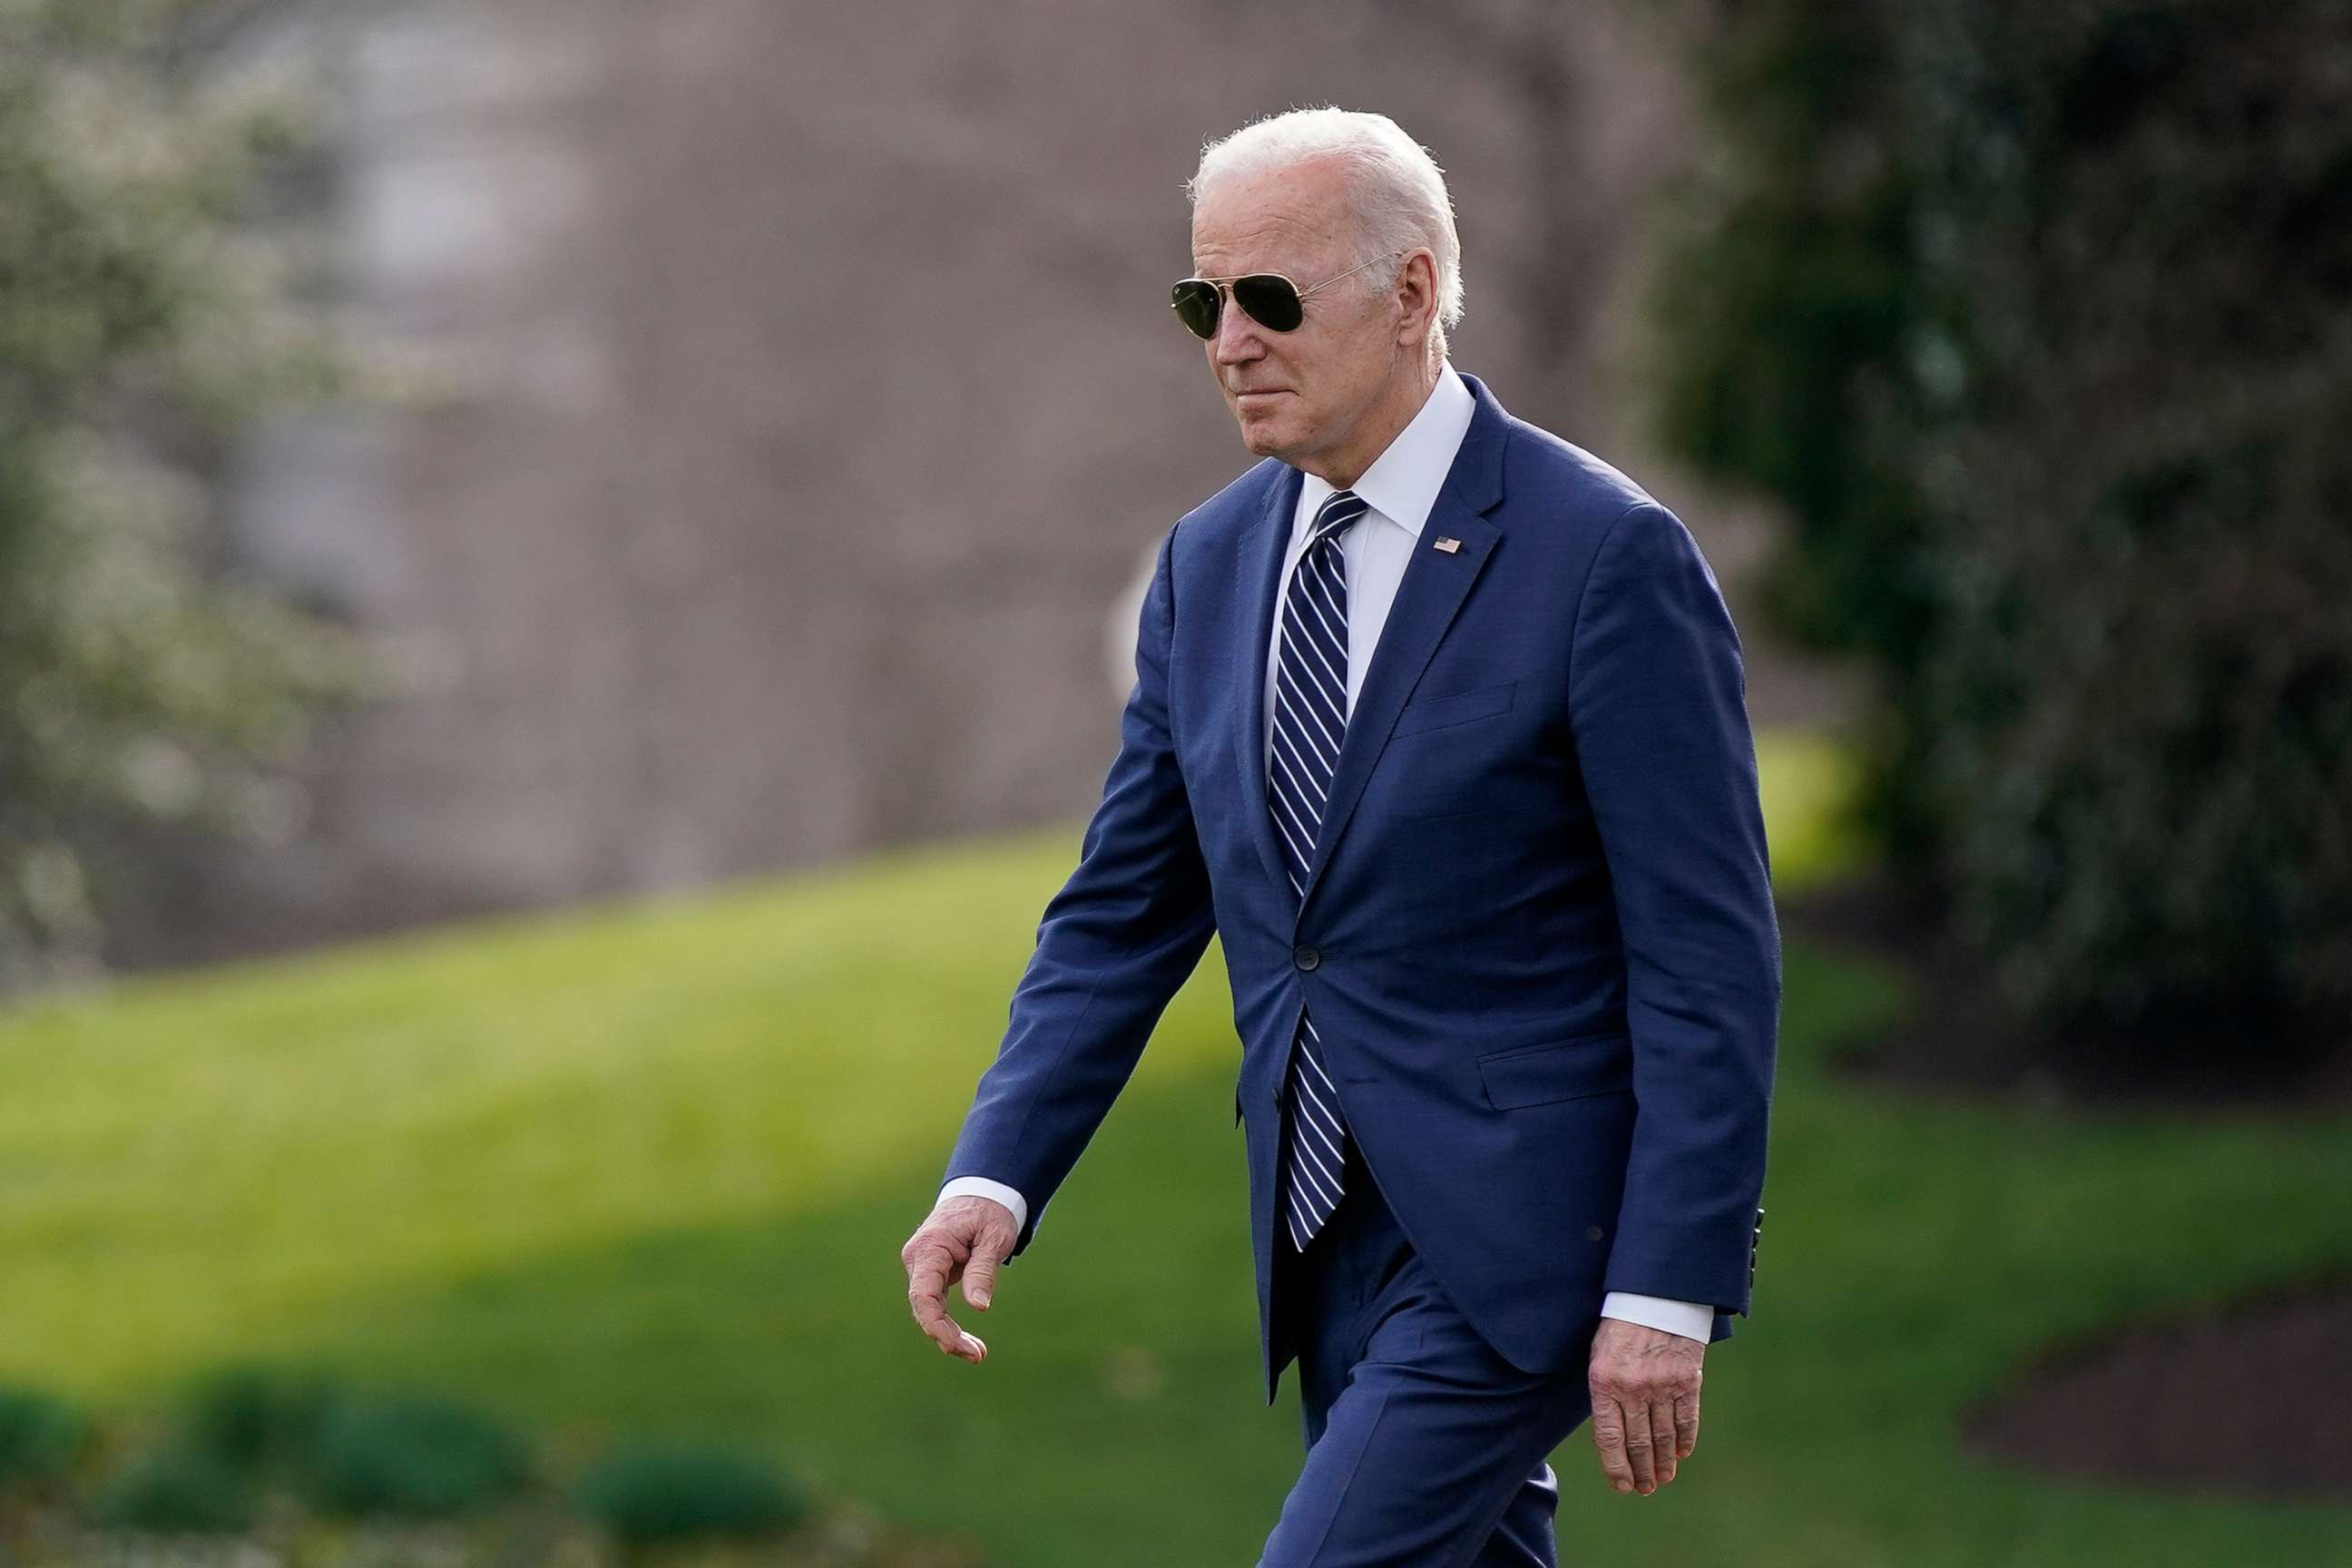 PHOTO: President Joe Biden walks on the South Lawn of the White House before boarding Marine One, March 18, 2022.